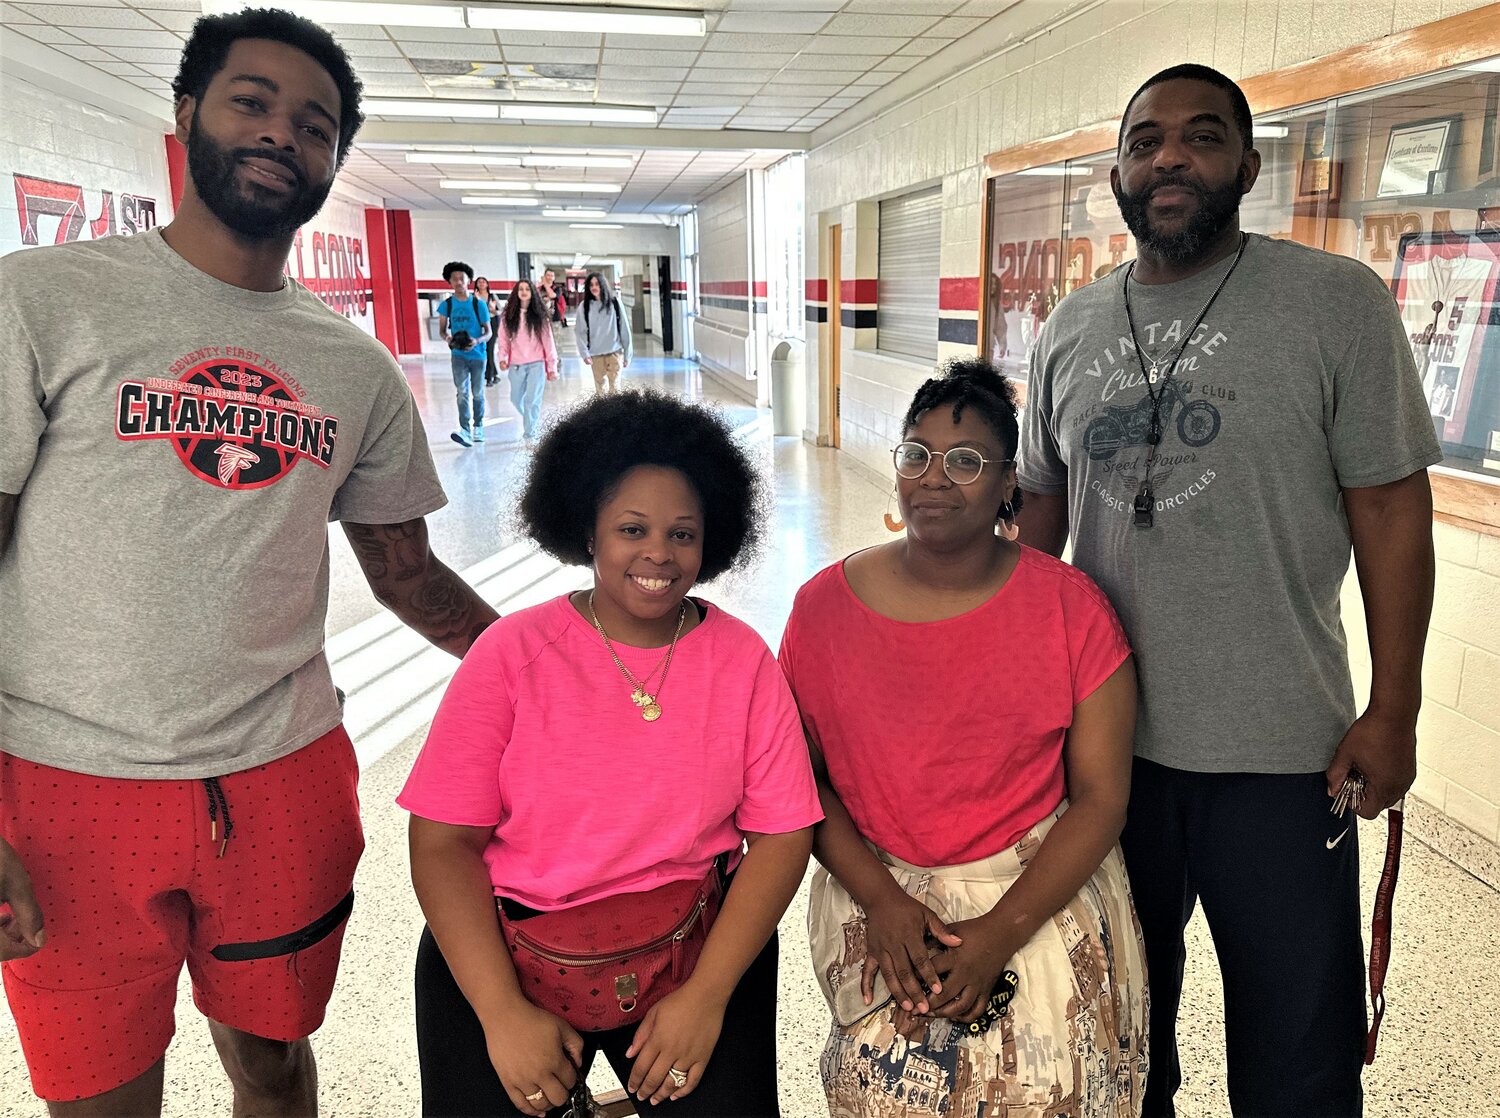 Seventy-First is one of only 106 schools in the state that had no coaches or athletes ejected from a game for misconduct last year. Coaches, from left, include Jeremy Ingram, men’s basketball; Brandie Ingram, women’s basketball; Lakelli Butler, volleyball; and Duran McLaurin, football.